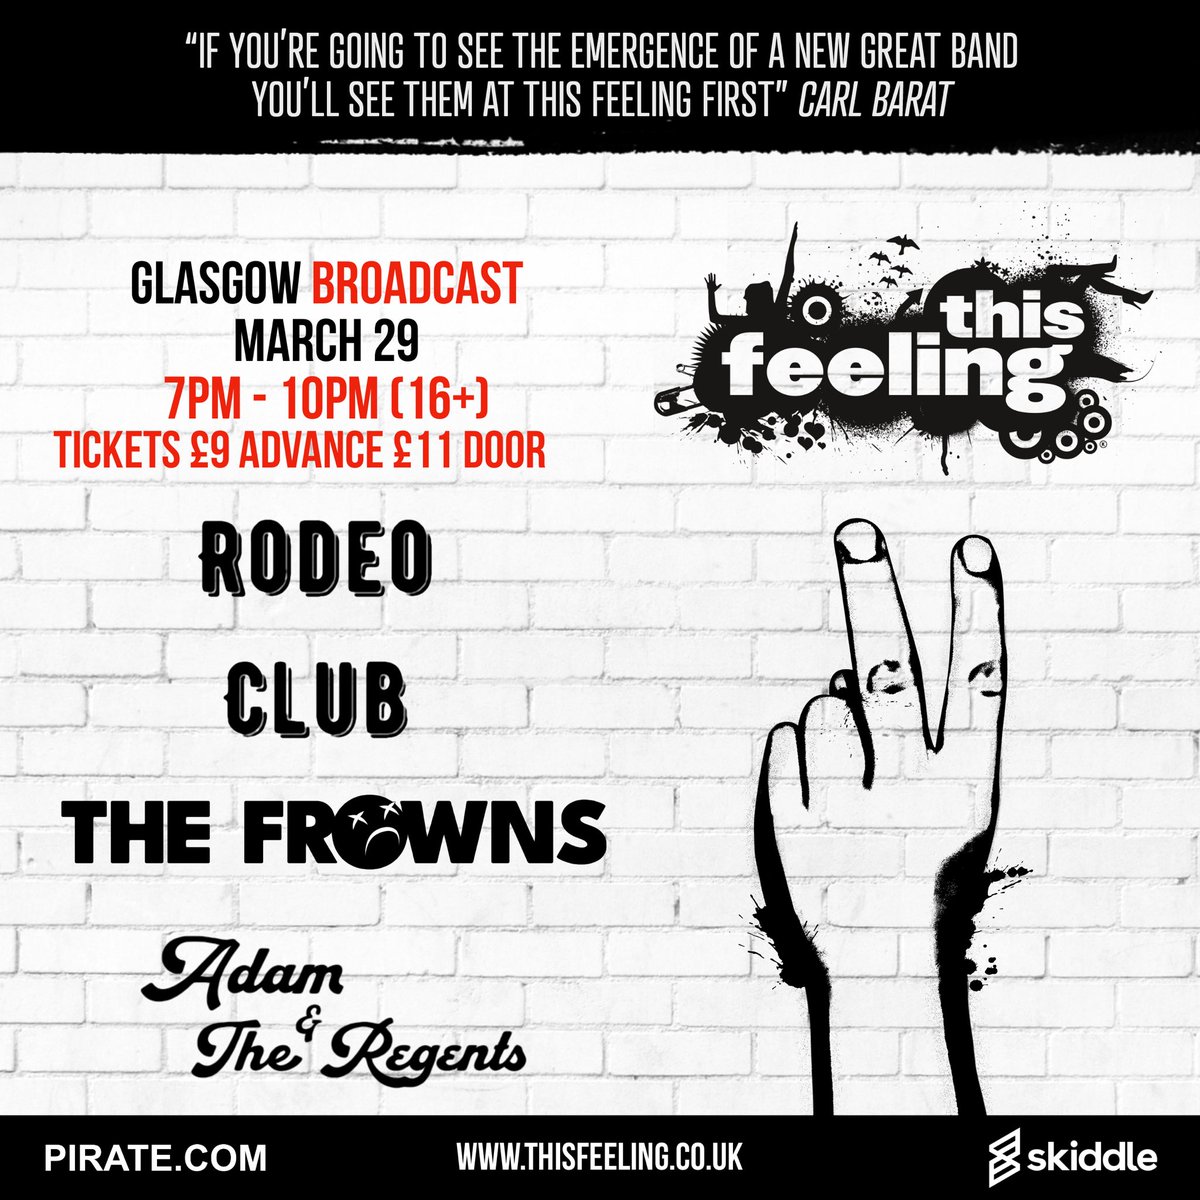 NEXT FRIDAY!!!! Another massive gig for us next Friday at broadcast with the guys @This_Feeling Make sure to grab a ticket from the link in bio if you fancy coming down -The Frowns